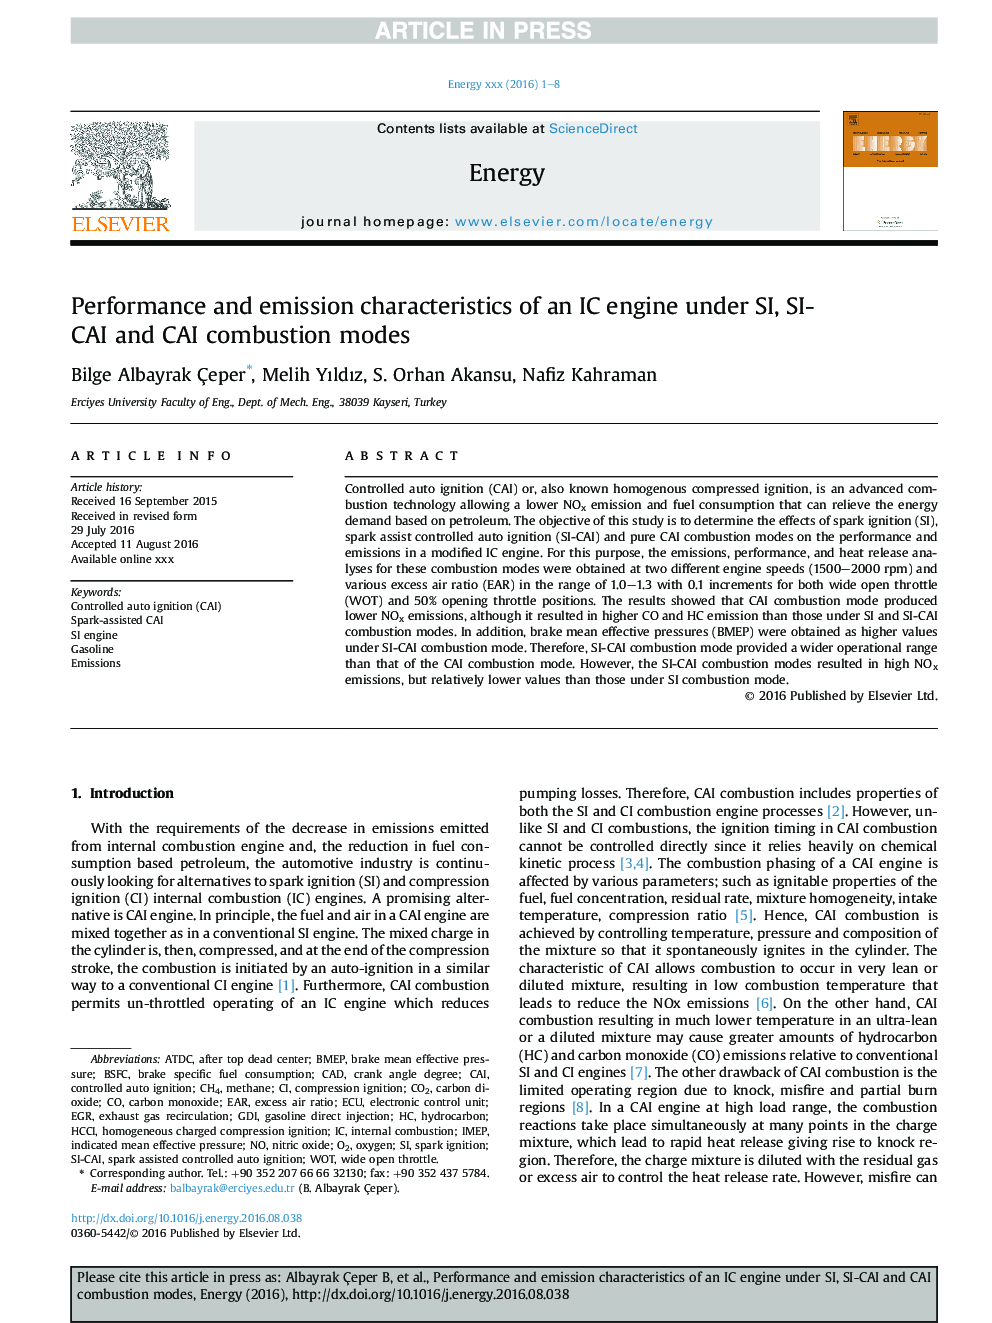 Performance and emission characteristics of an IC engine under SI, SI-CAI and CAI combustion modes